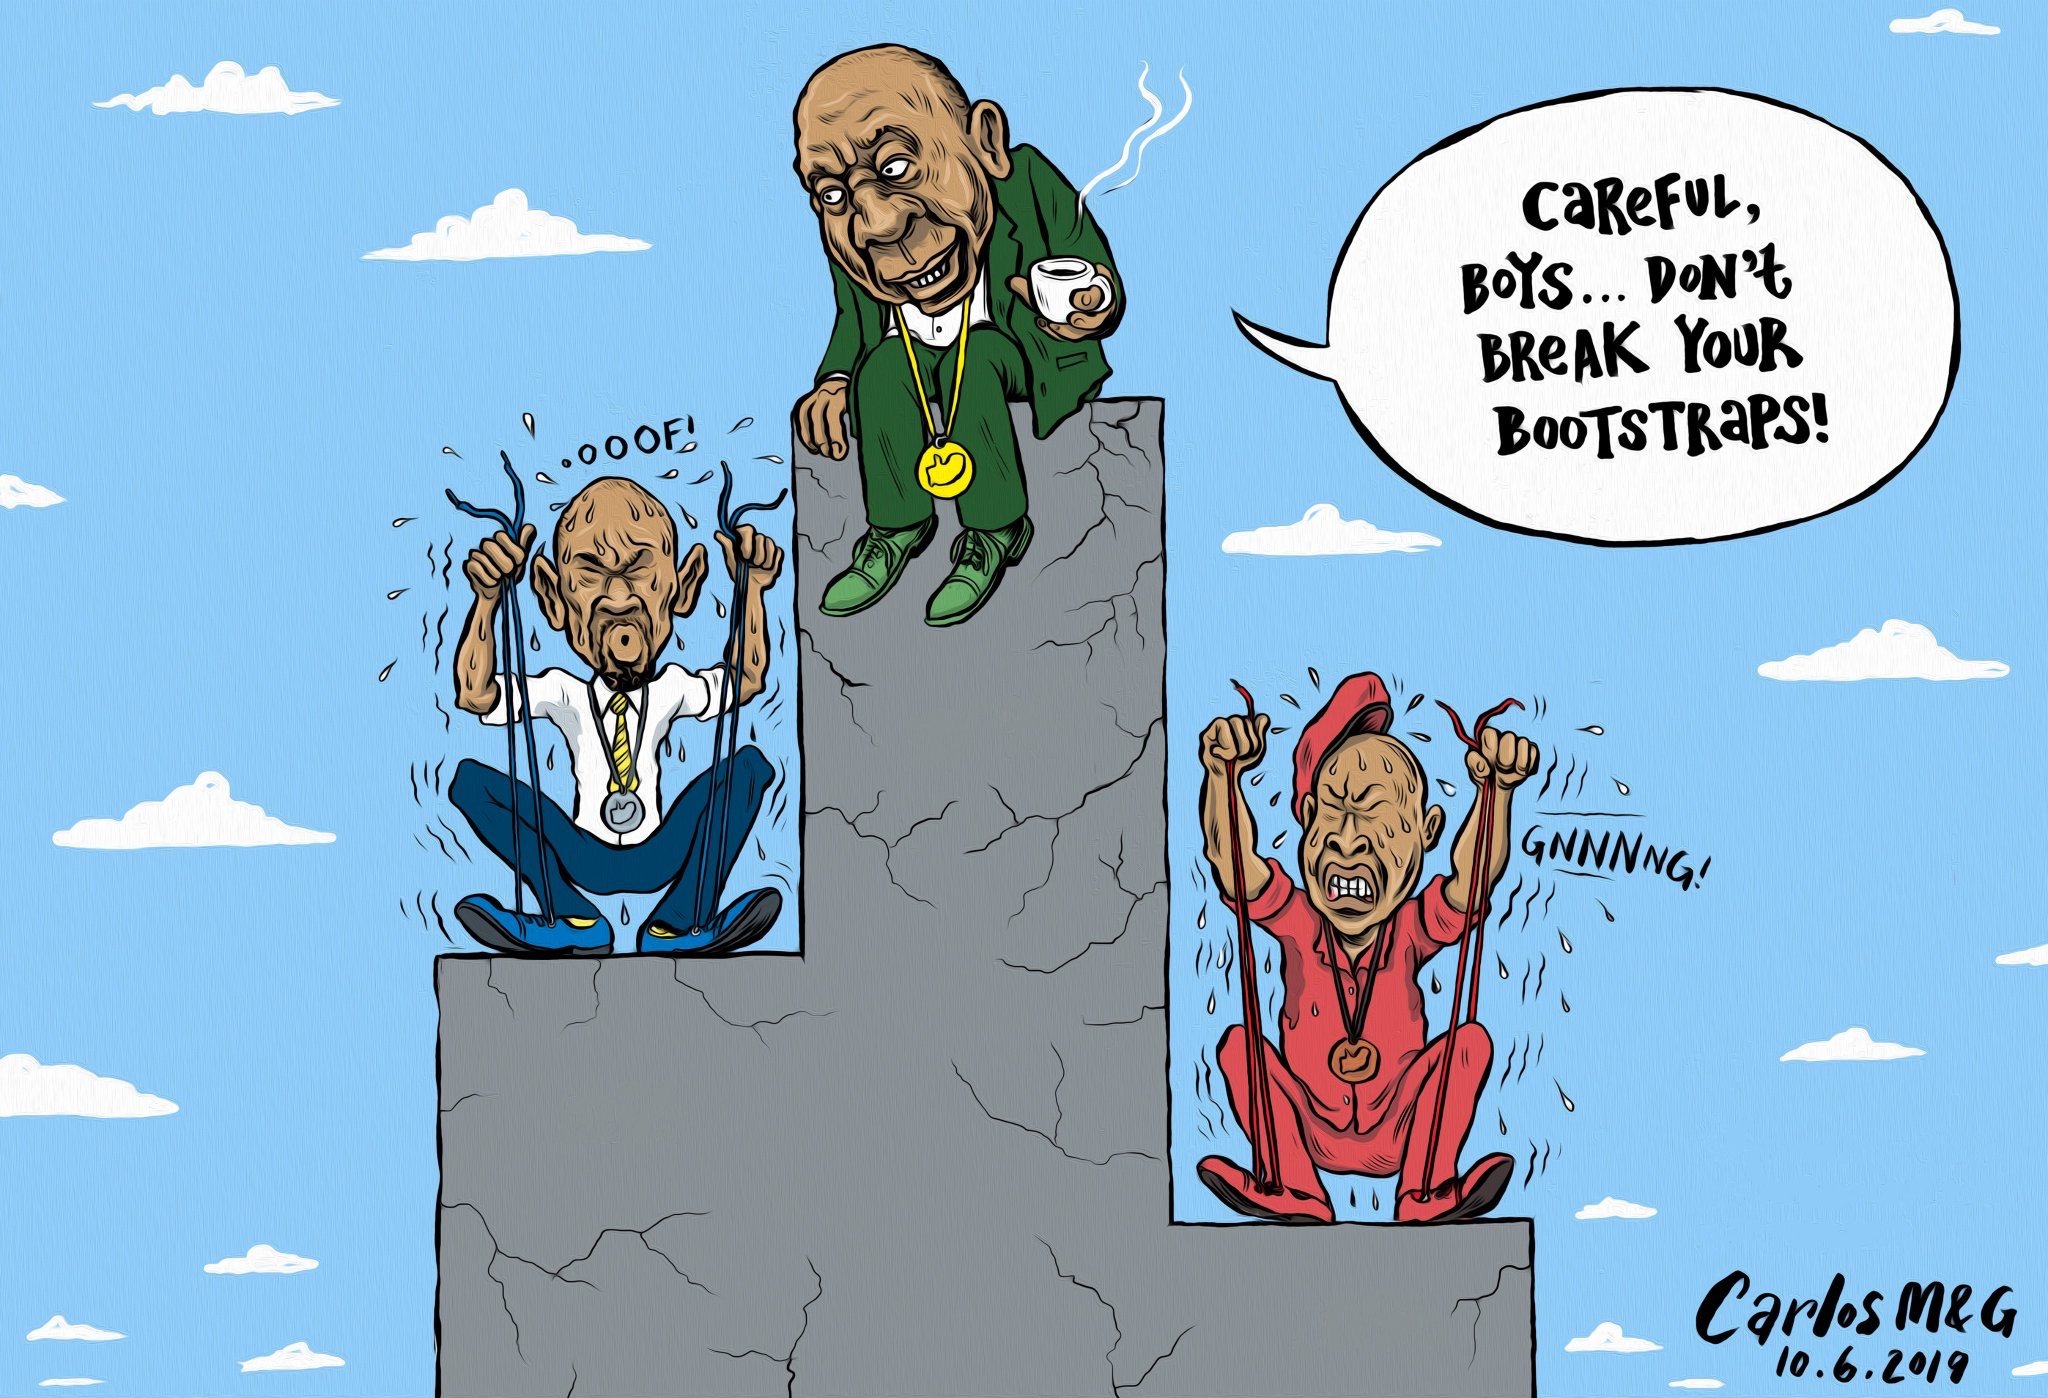 Carlos: The Election Race – The Mail & Guardian